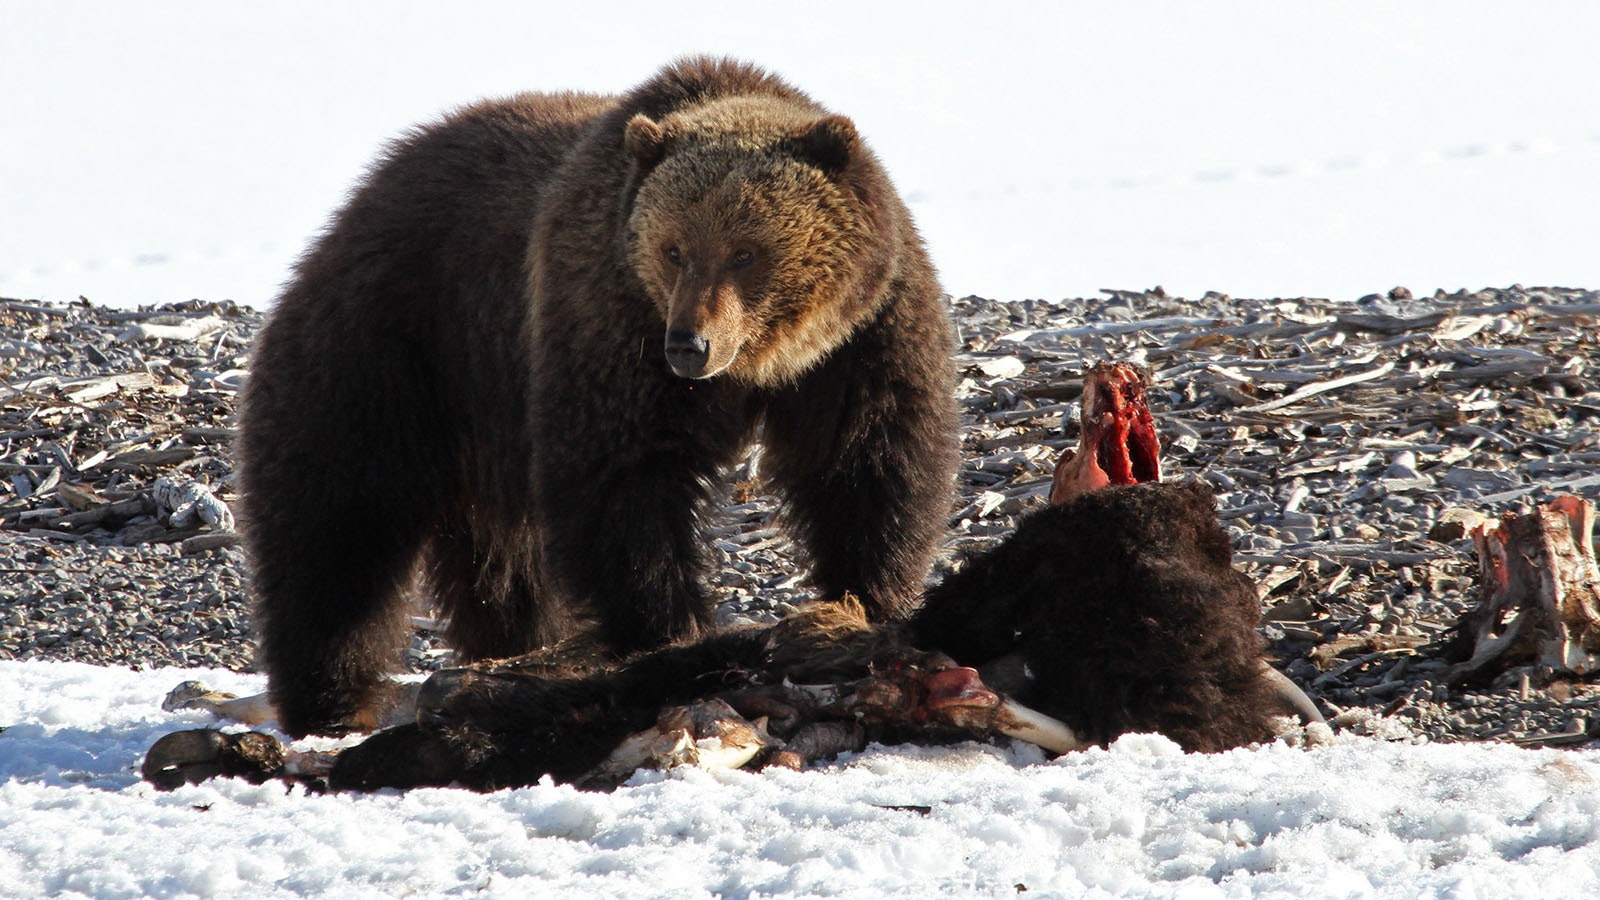 A grizzly bear on a winter-killed bison carcass is a sure sign of spring in Yellowstone National Park.